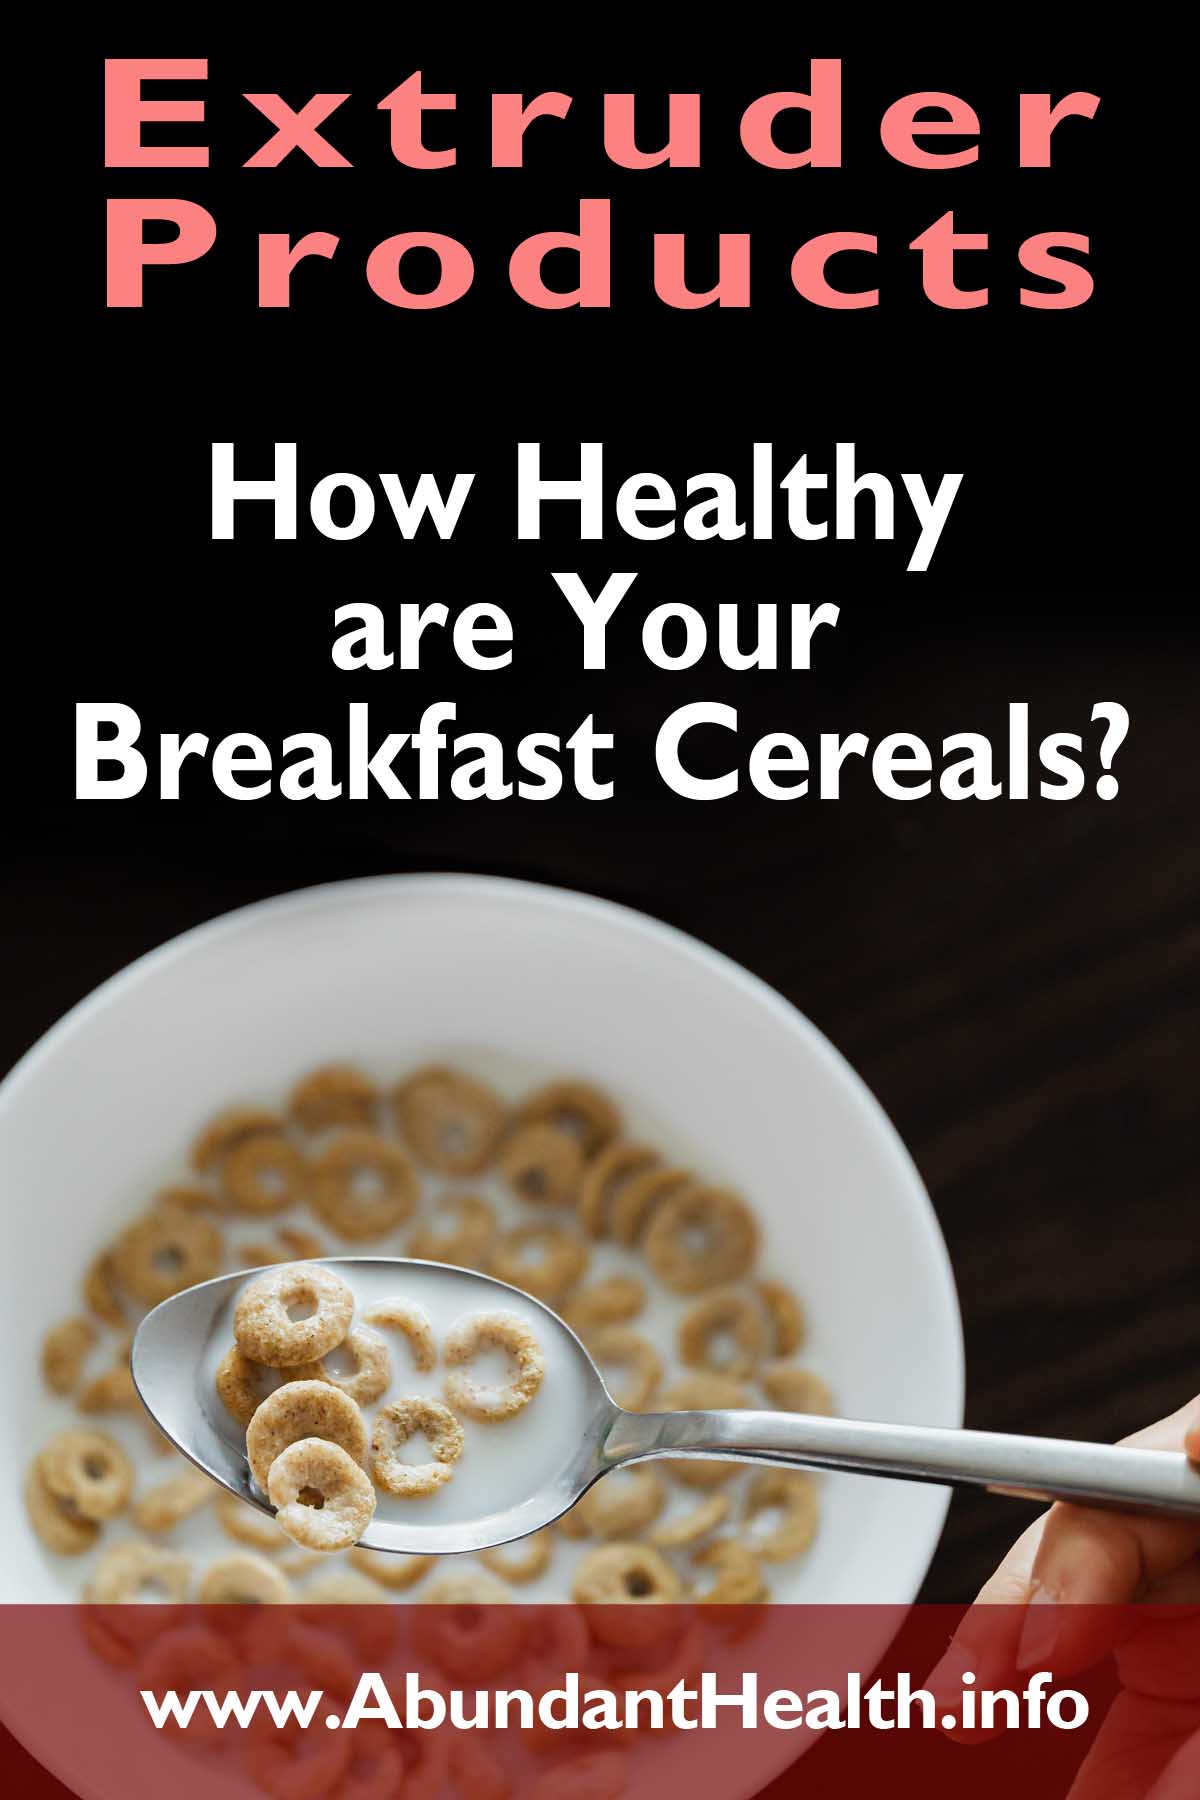 Extruder Products – How Healthy are Your Breakfast Cereals?